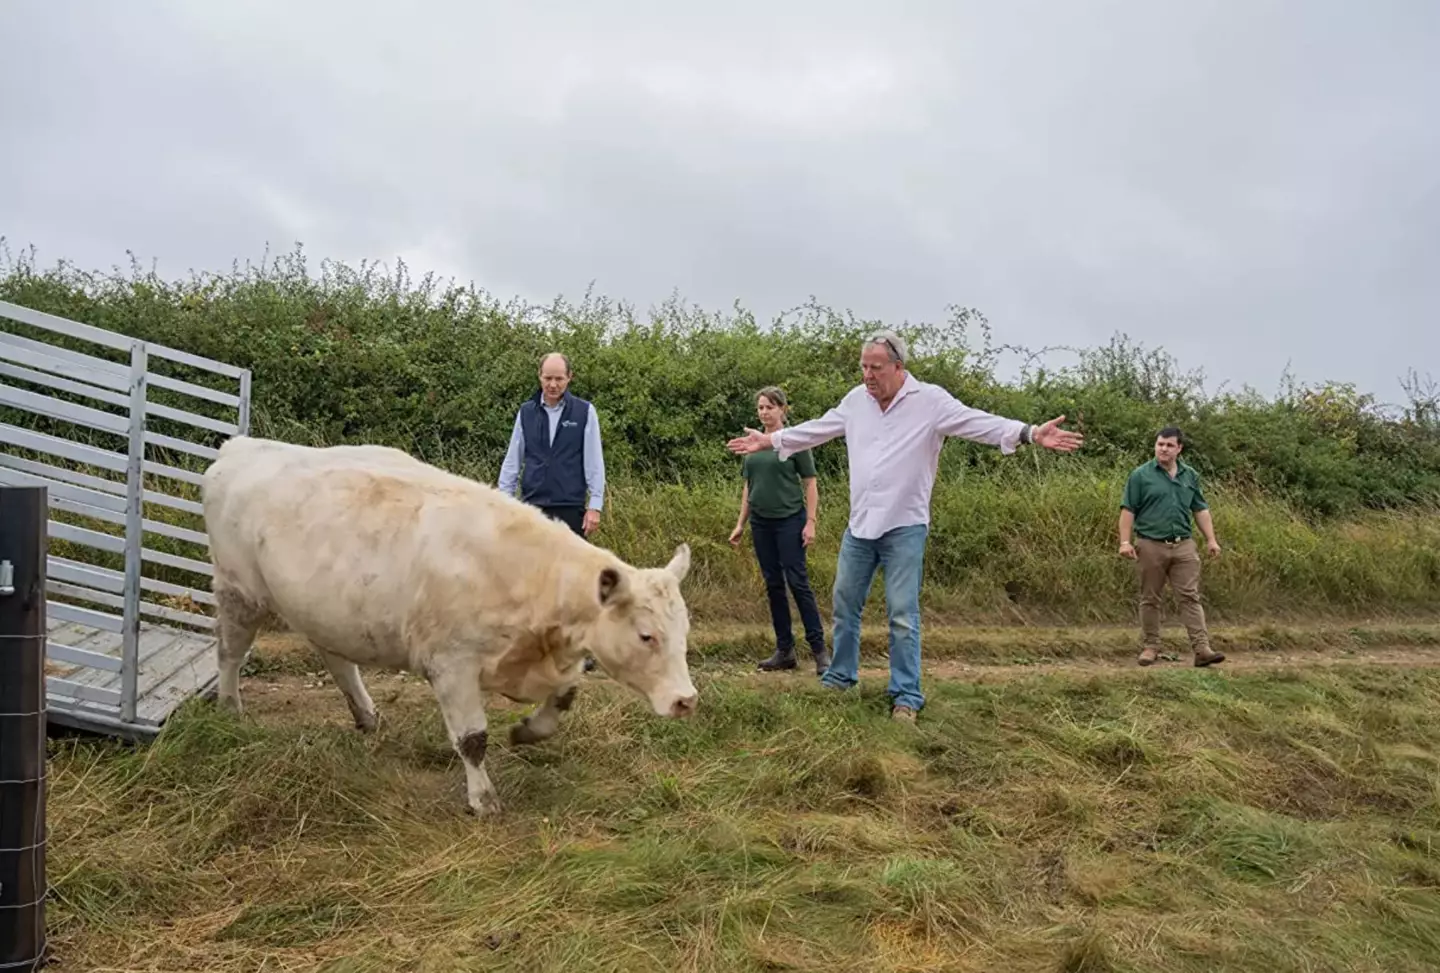 Series two of Clarkson's Farm featured Clarkson's new herd of cows.